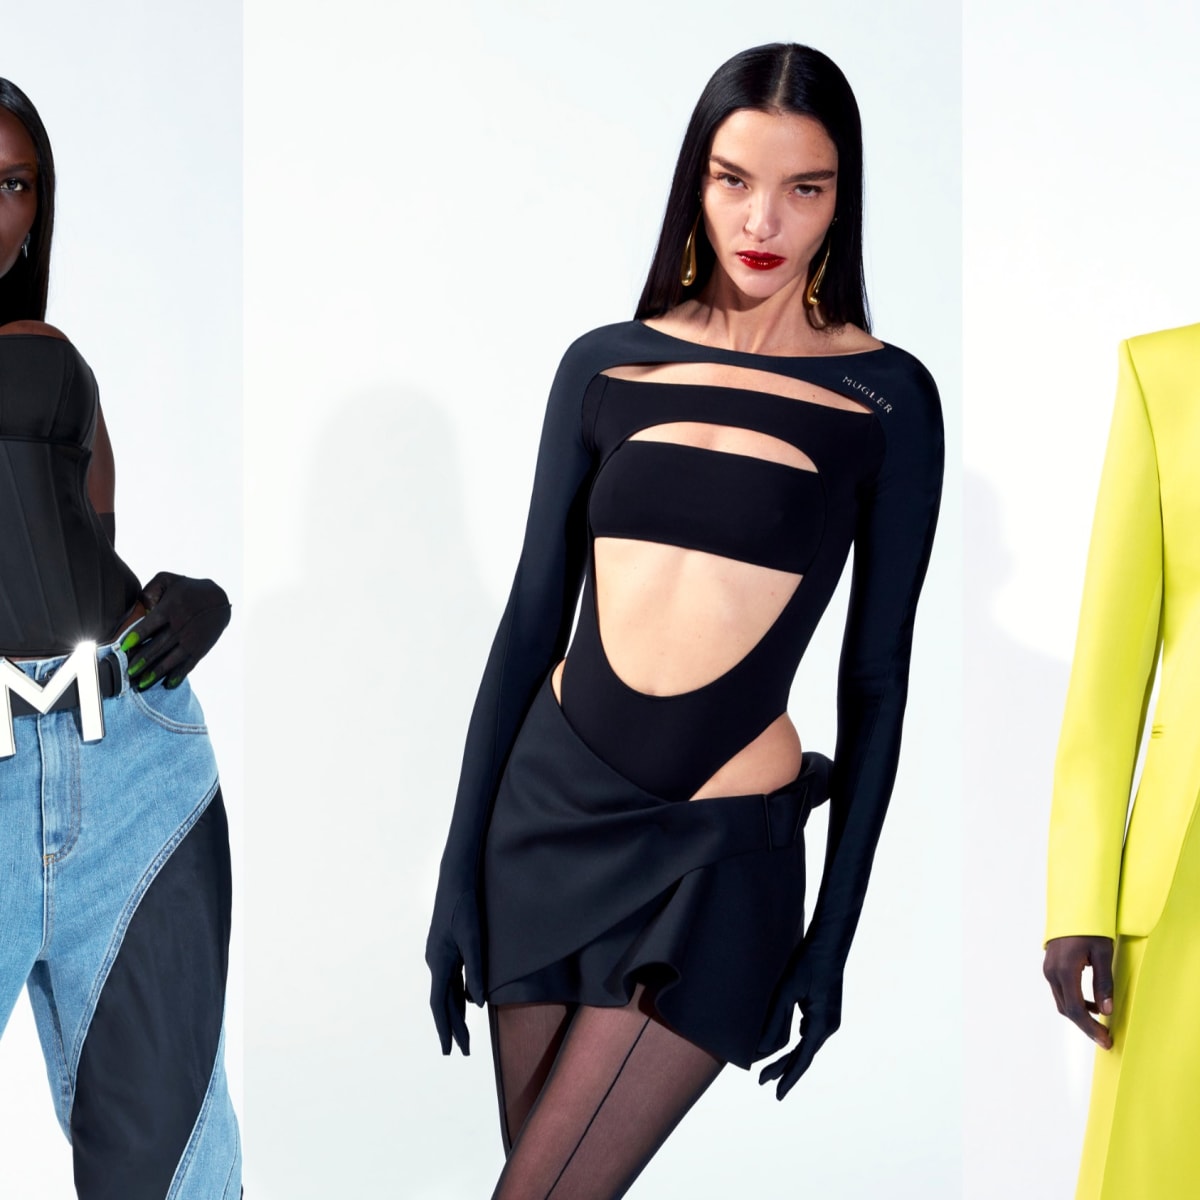 We Tried the Mugler x H&M Collection